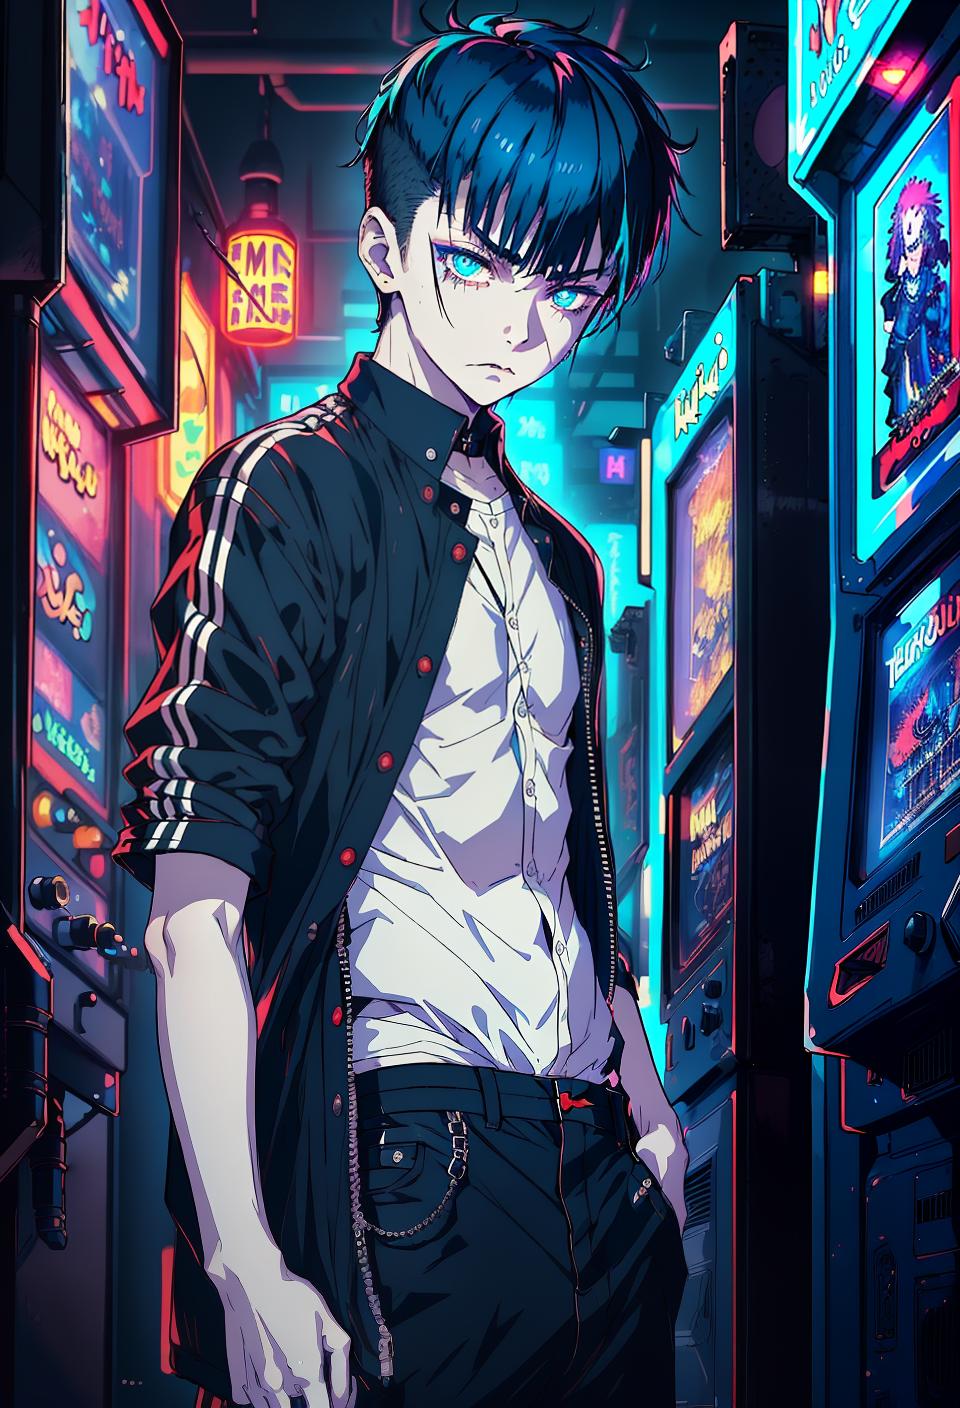  ((trending, highres, masterpiece, cinematic shot)), 1boy, young, male goth clothing, arcade scene, medium-length spiked dark blue hair, blunt bangs, large aqua eyes, neurotic personality, sad expression, very pale skin, epic, observant